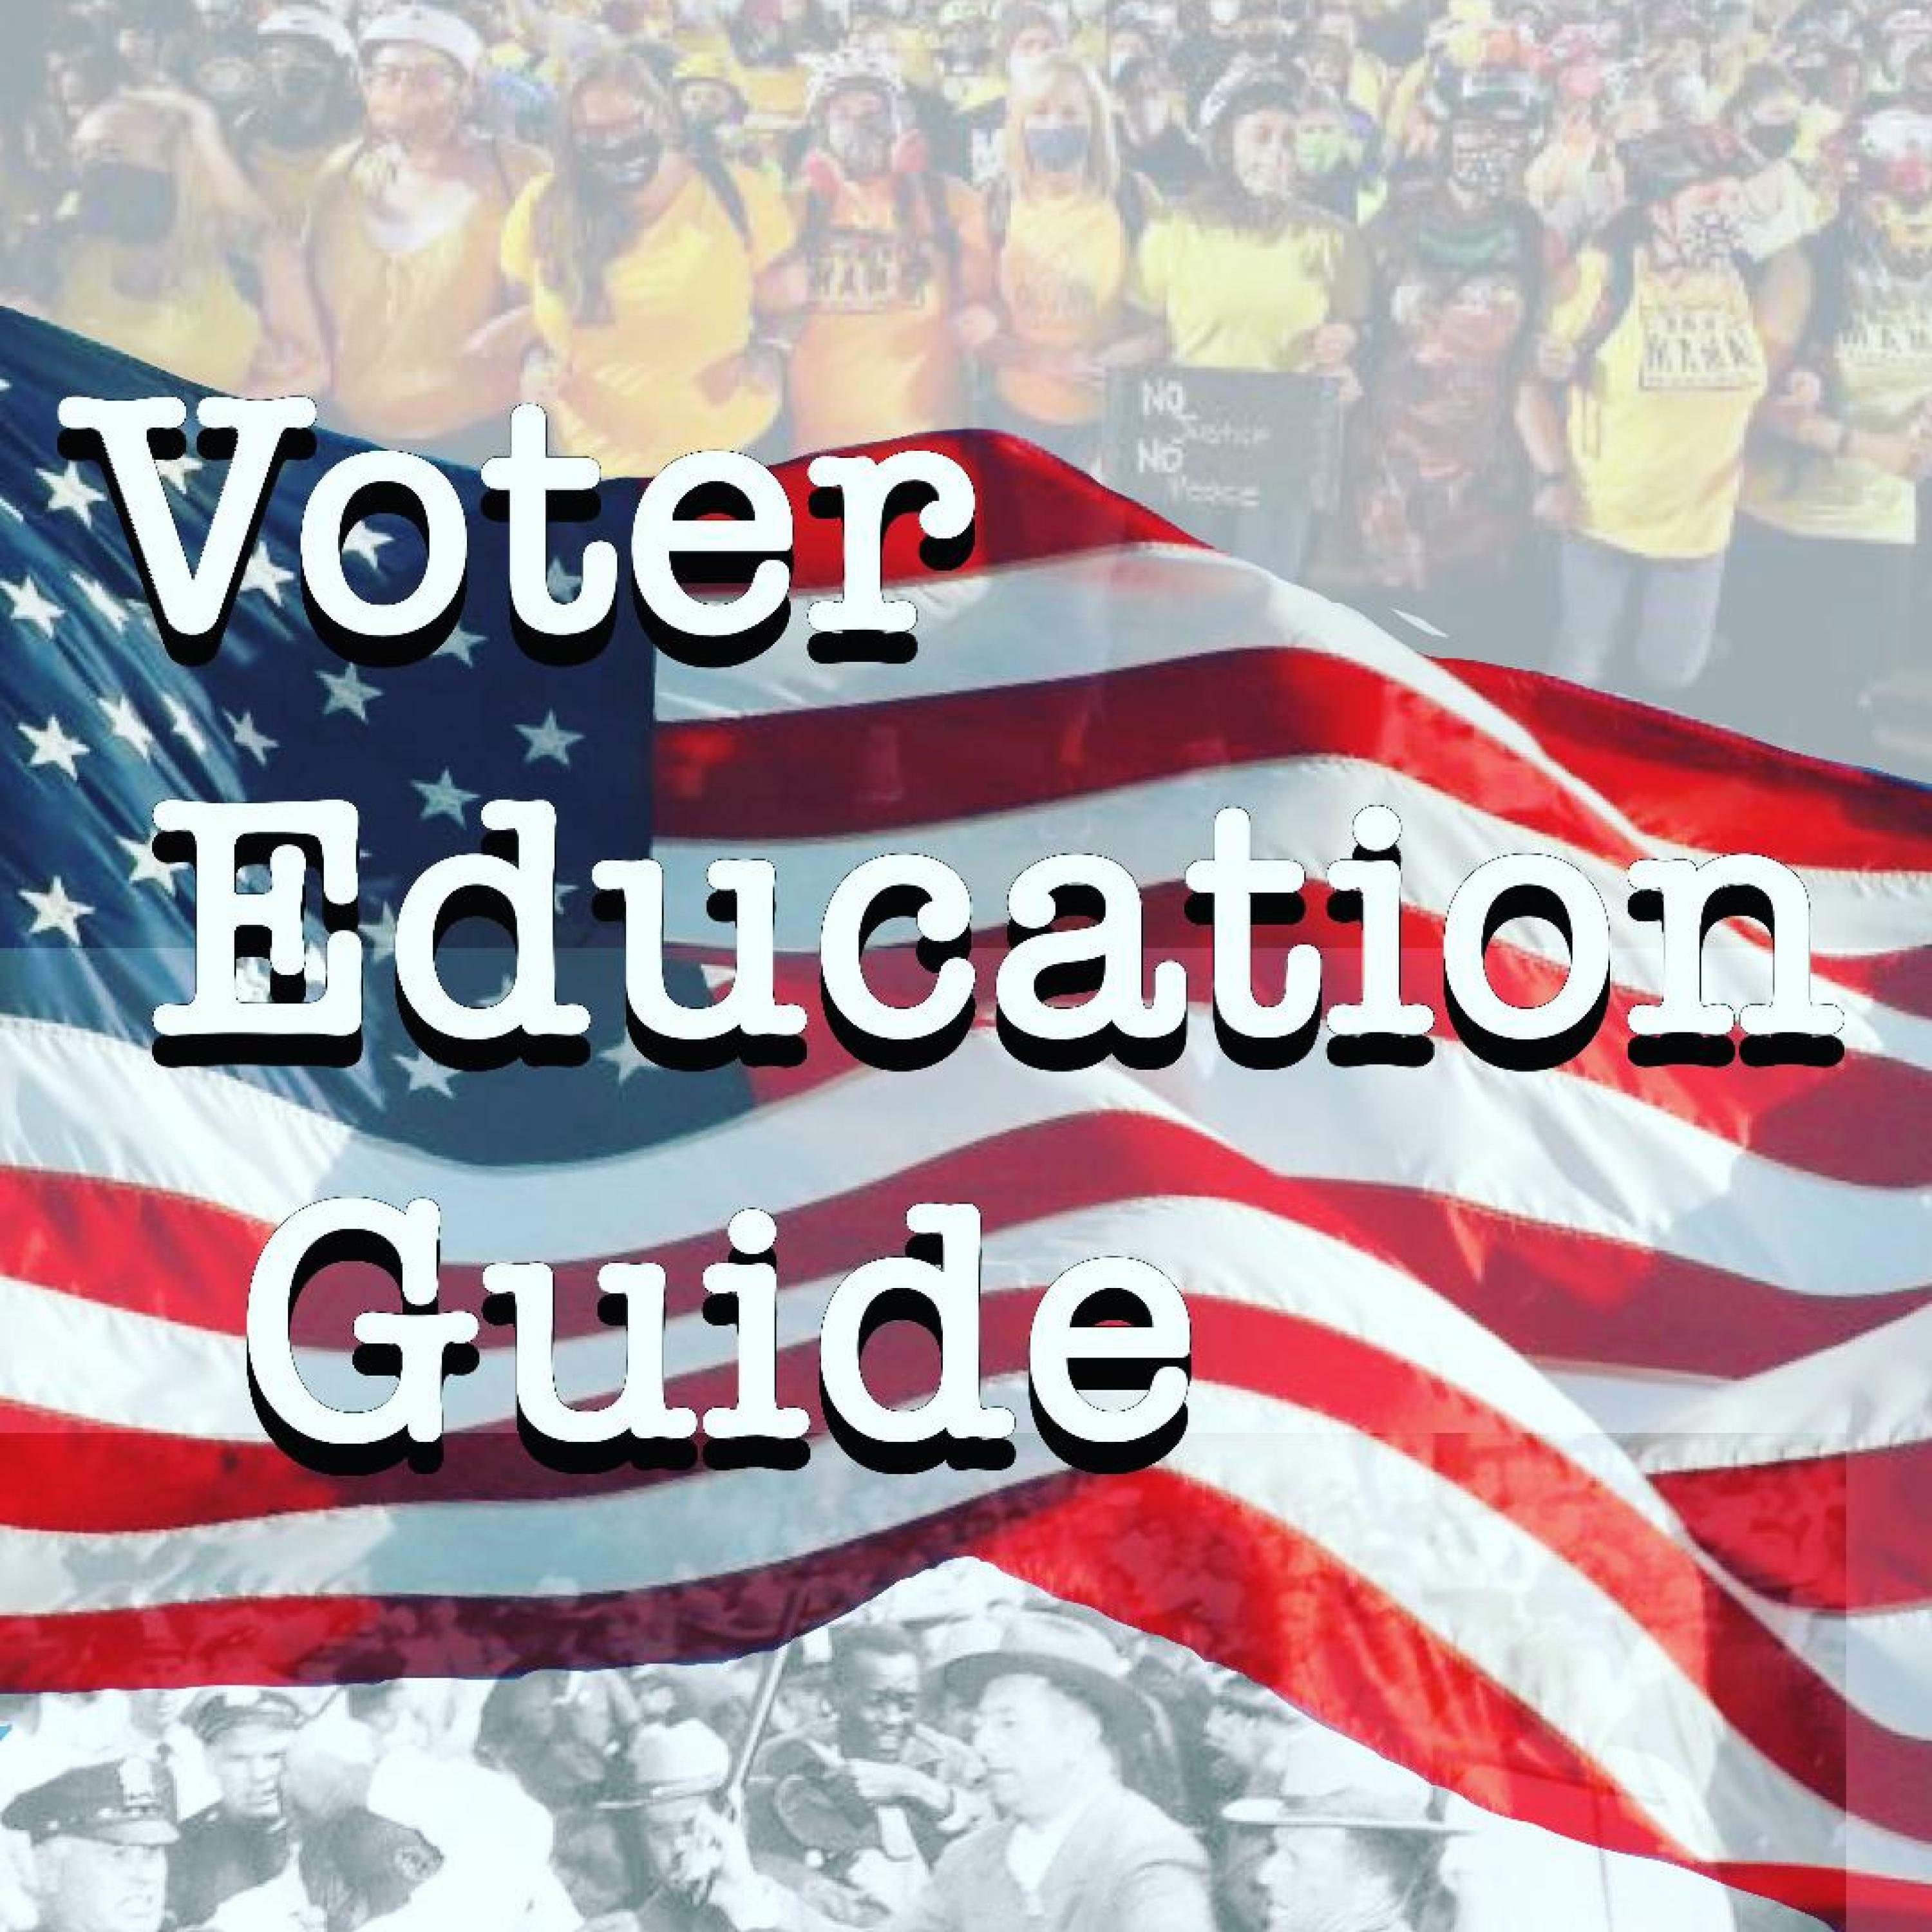 articles on voter education